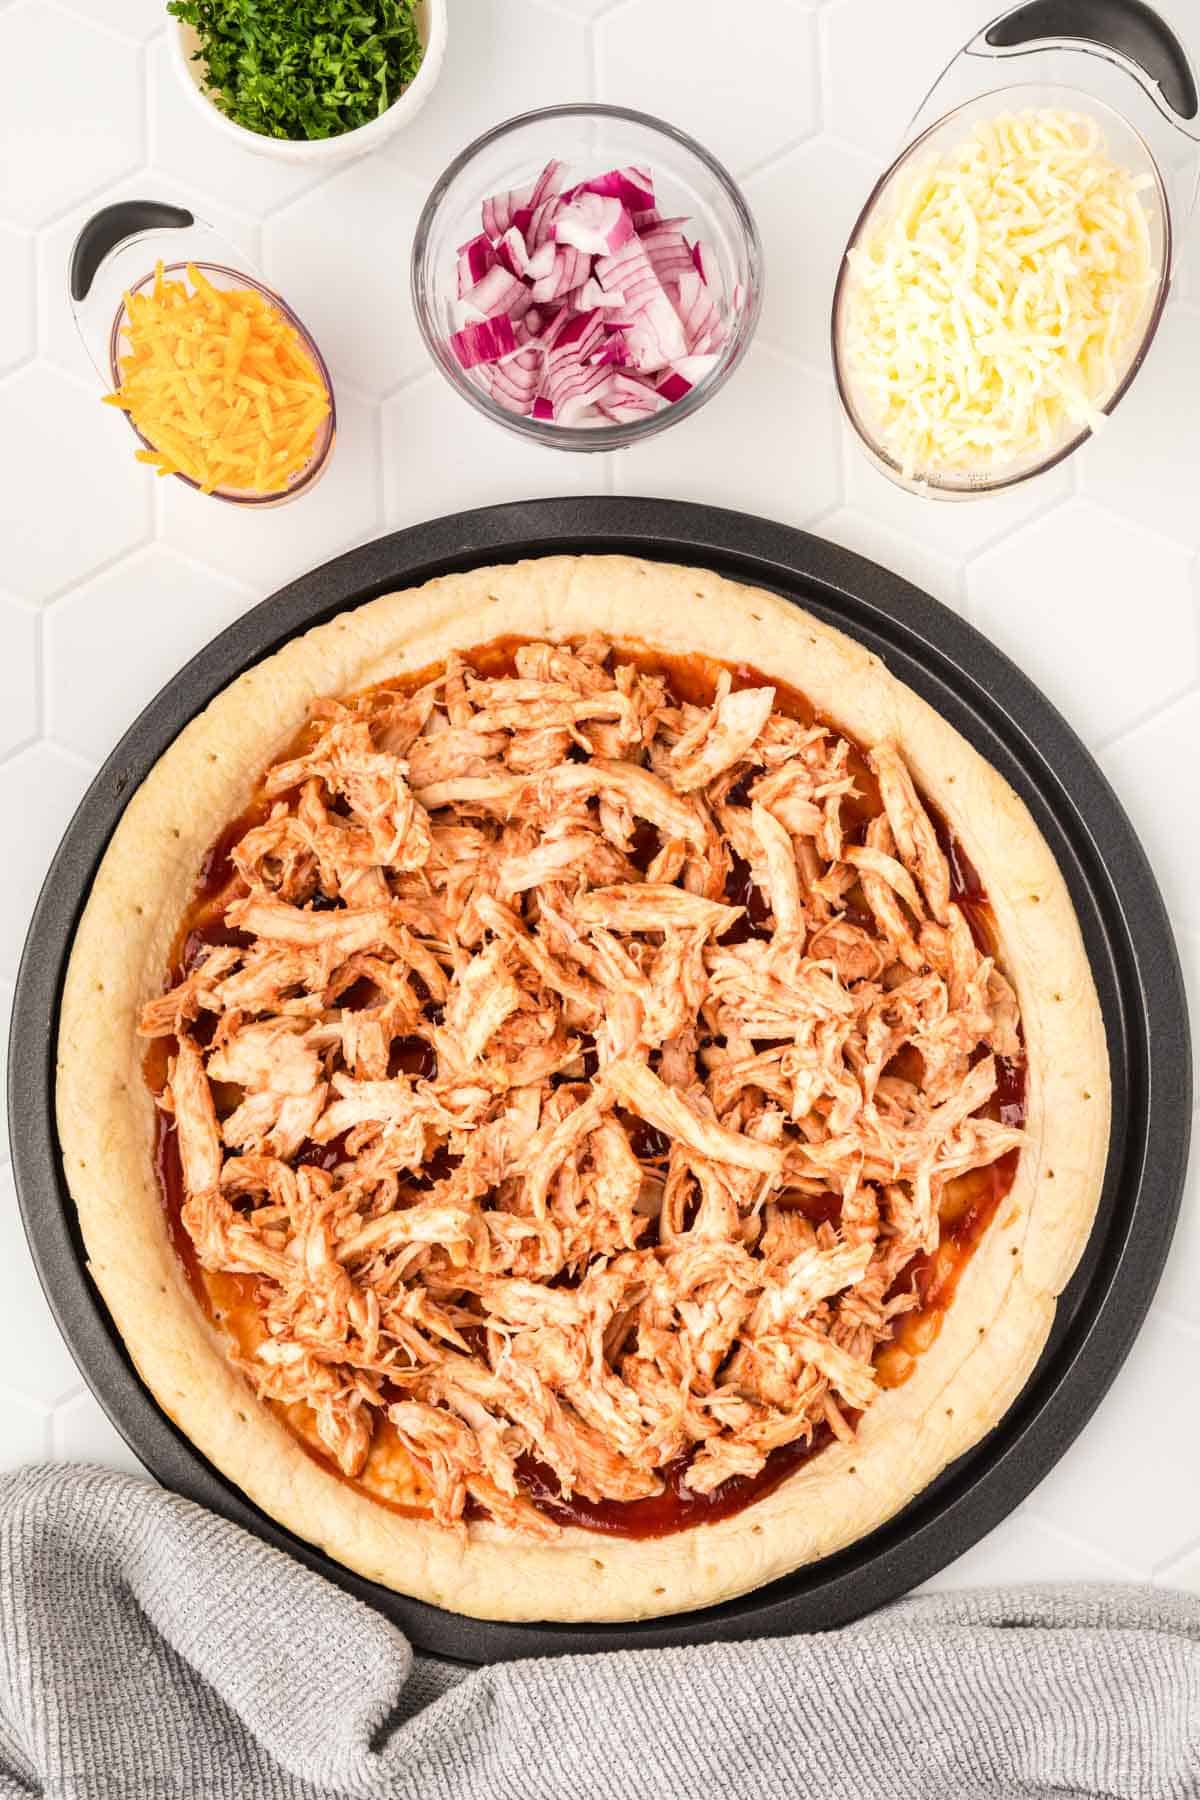 Topping the Pizza Crust with Shredded BBQ Chicken